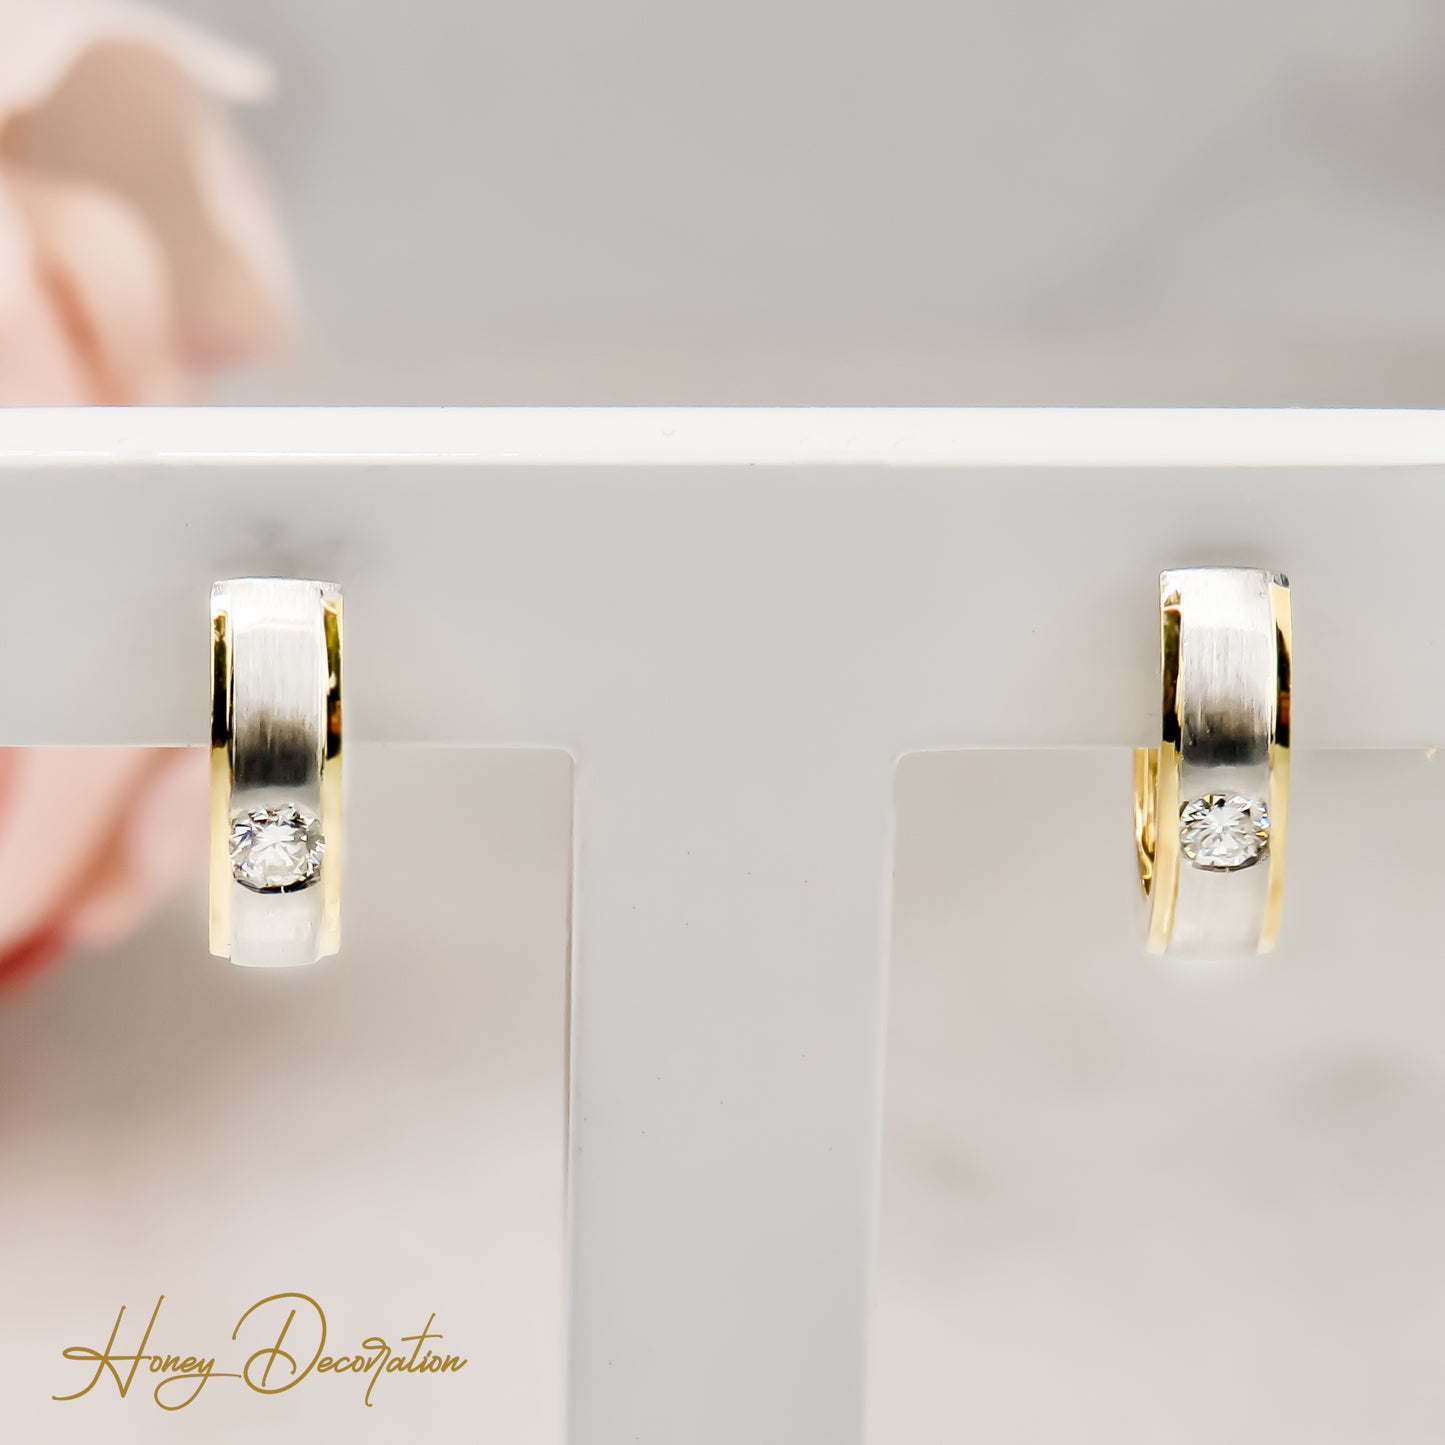 High quality bicolor earrings made of platinum and 750 gold